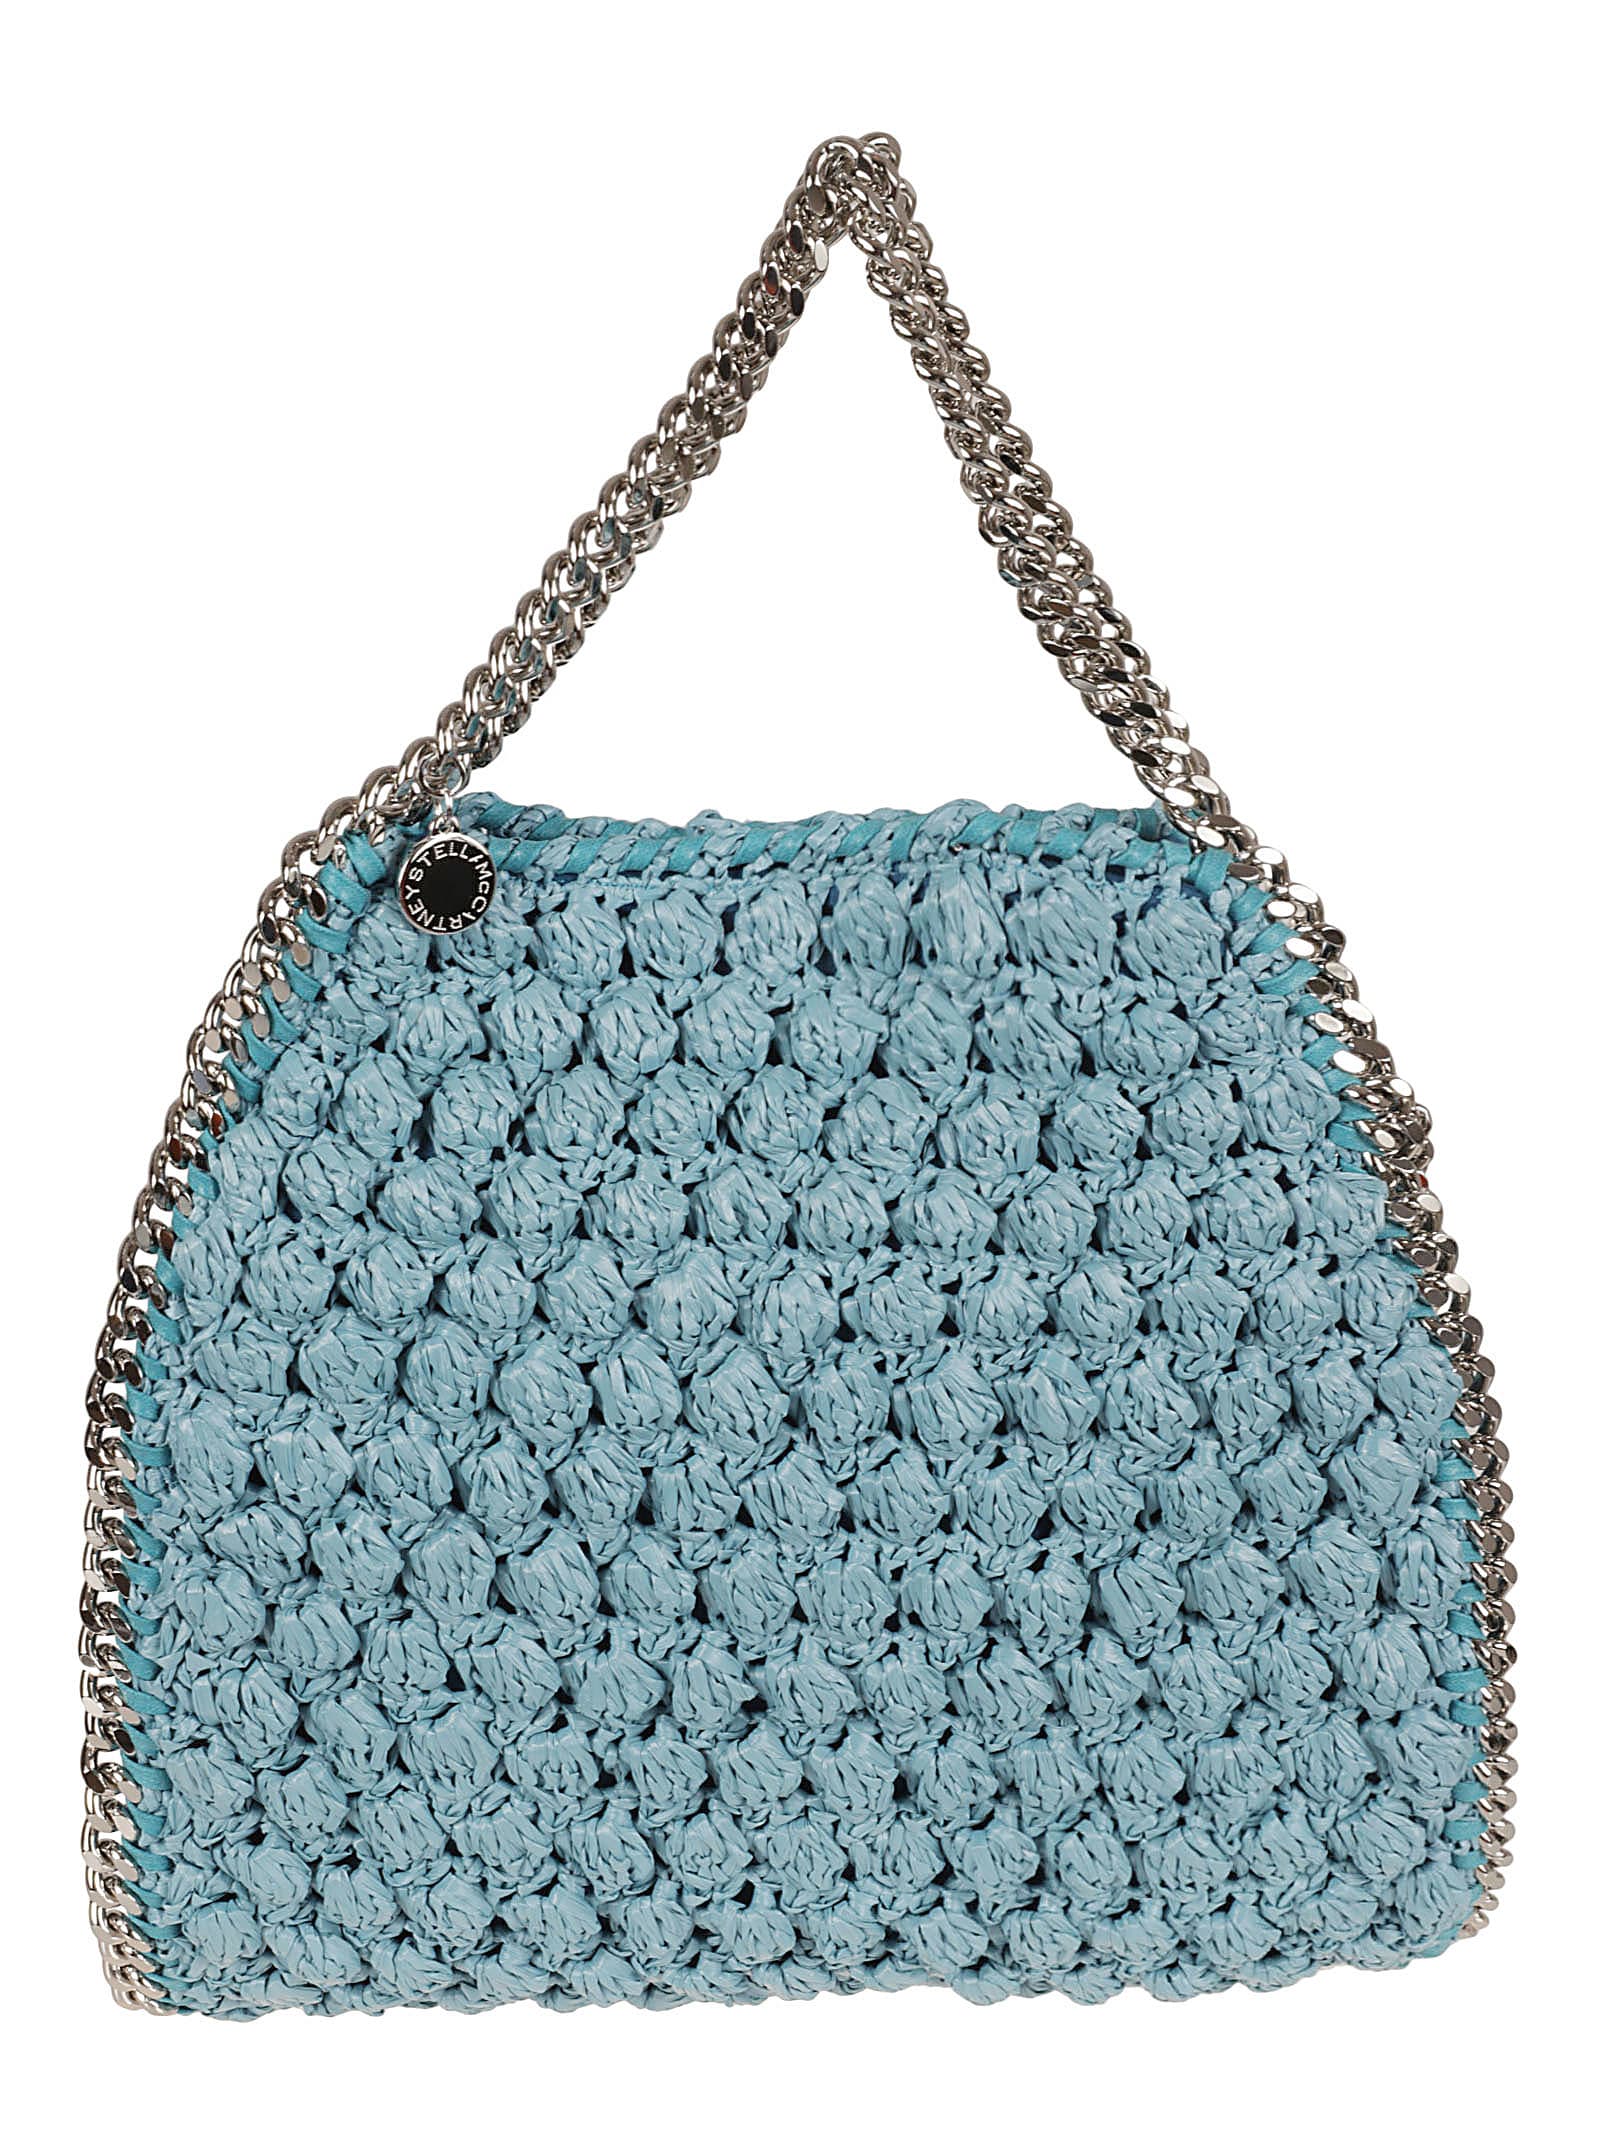 Stella Mccartney Eco Shaggy Deer Tote In Turquoise